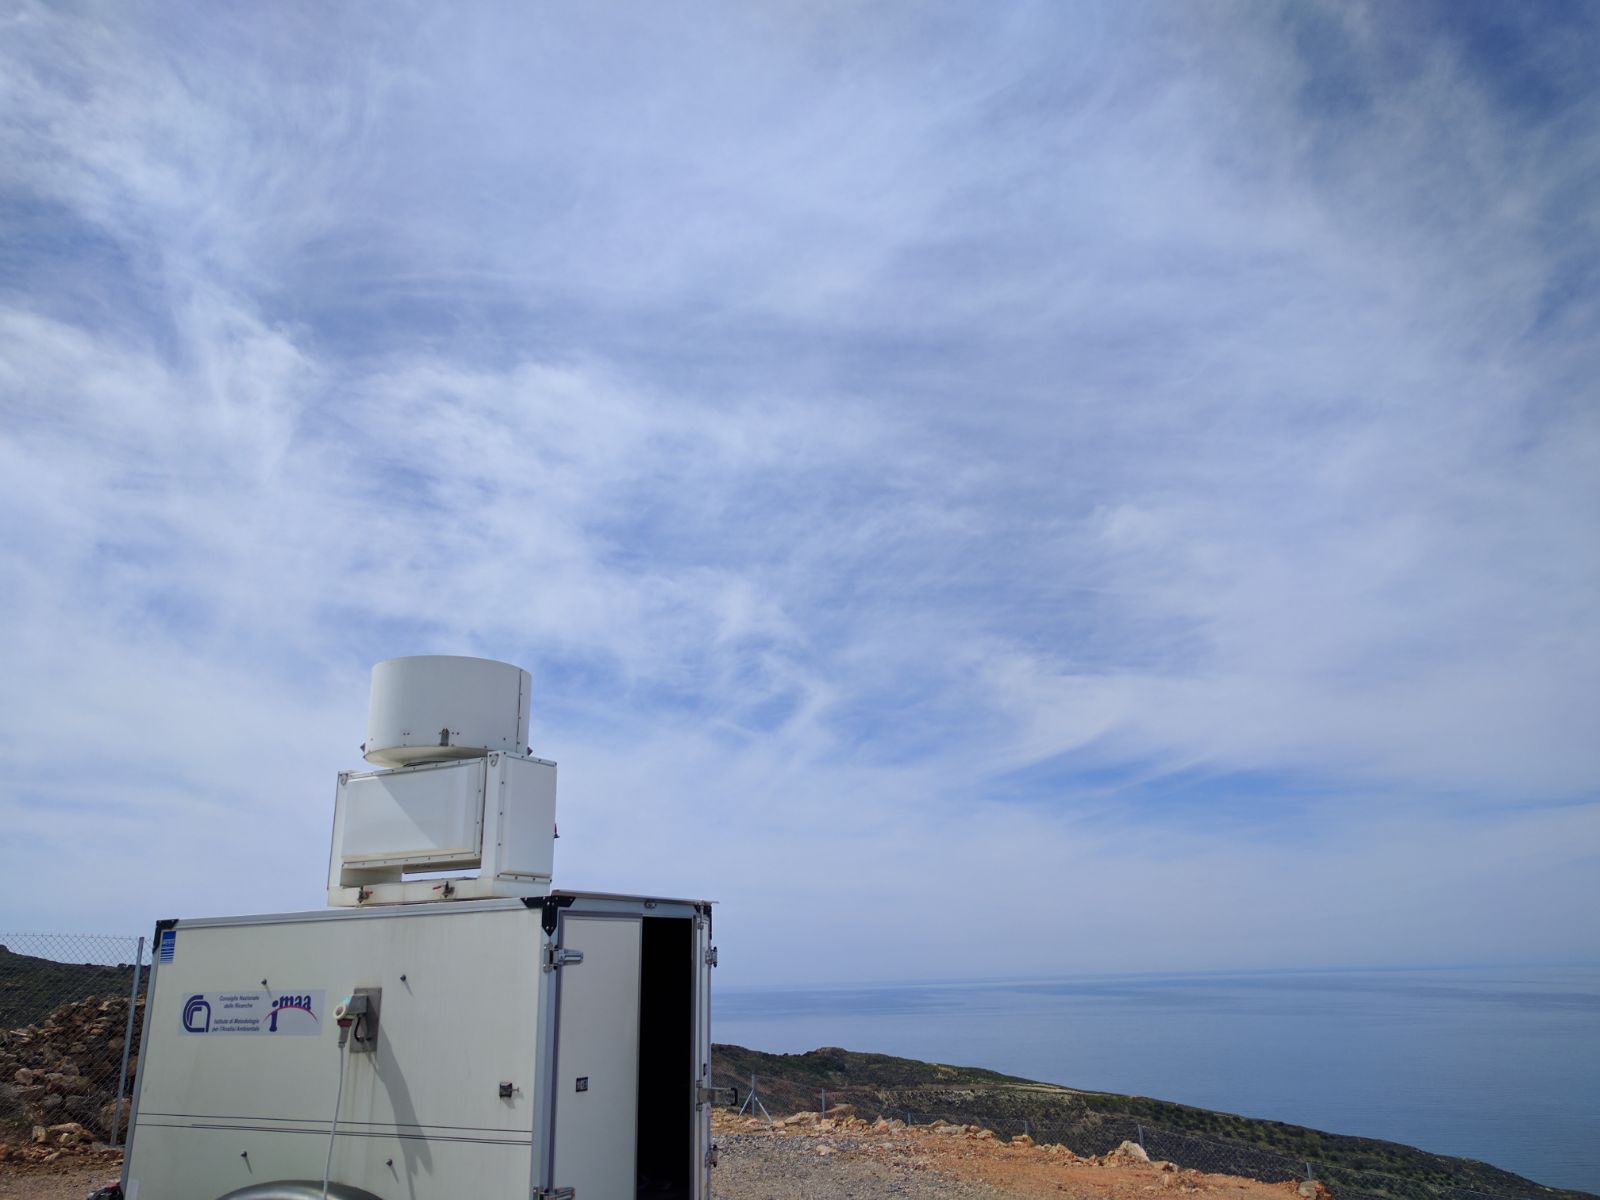 Cirrus clouds observation at Finokalia site.